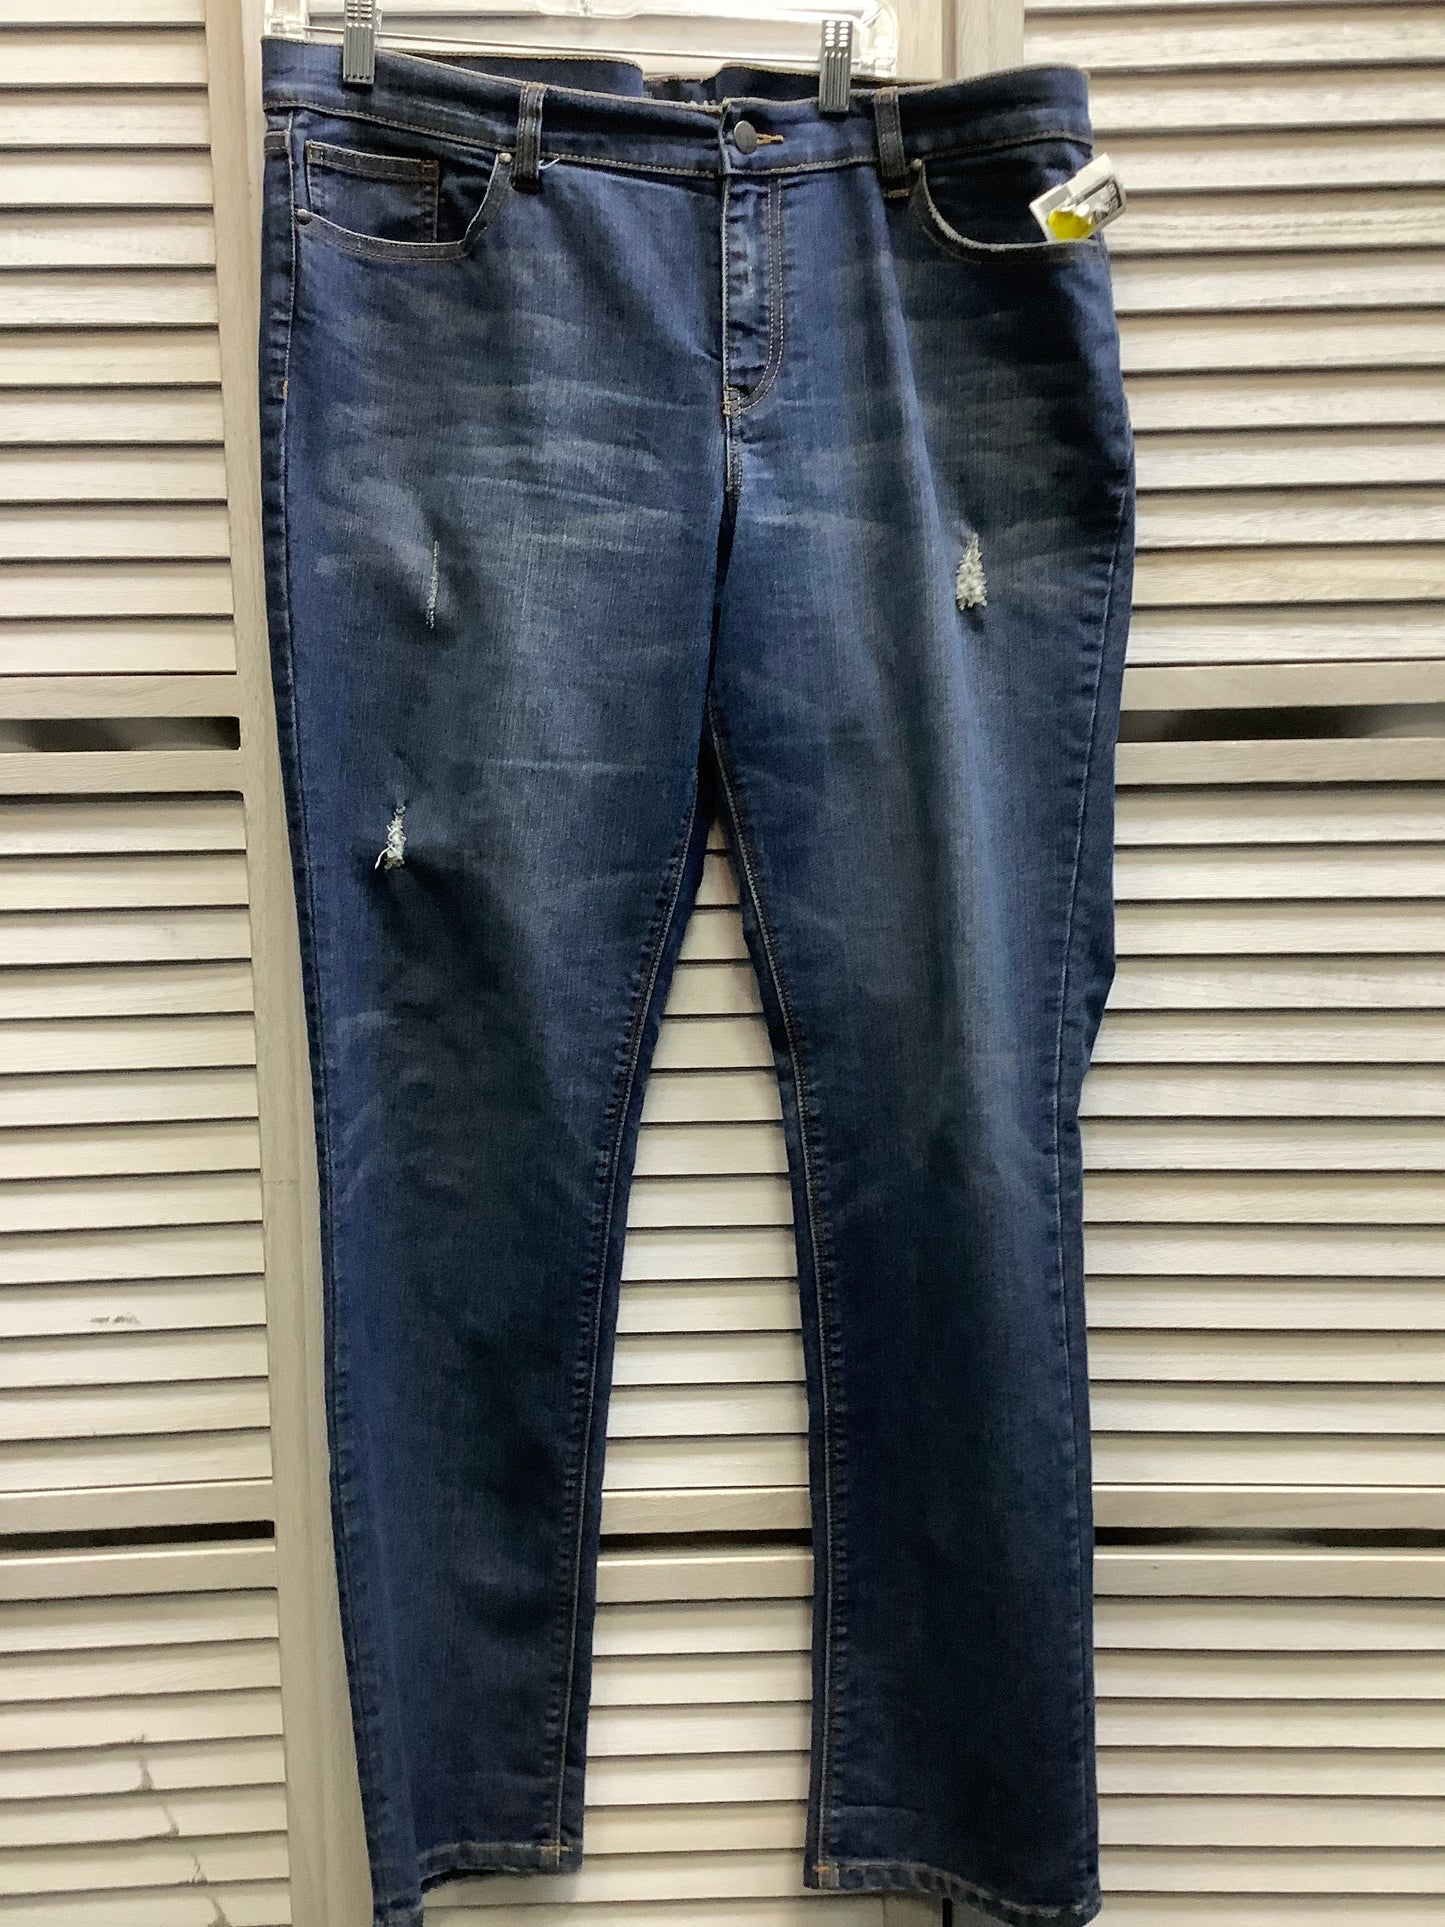 Denim Jeans Skinny New York And Co, Size 16